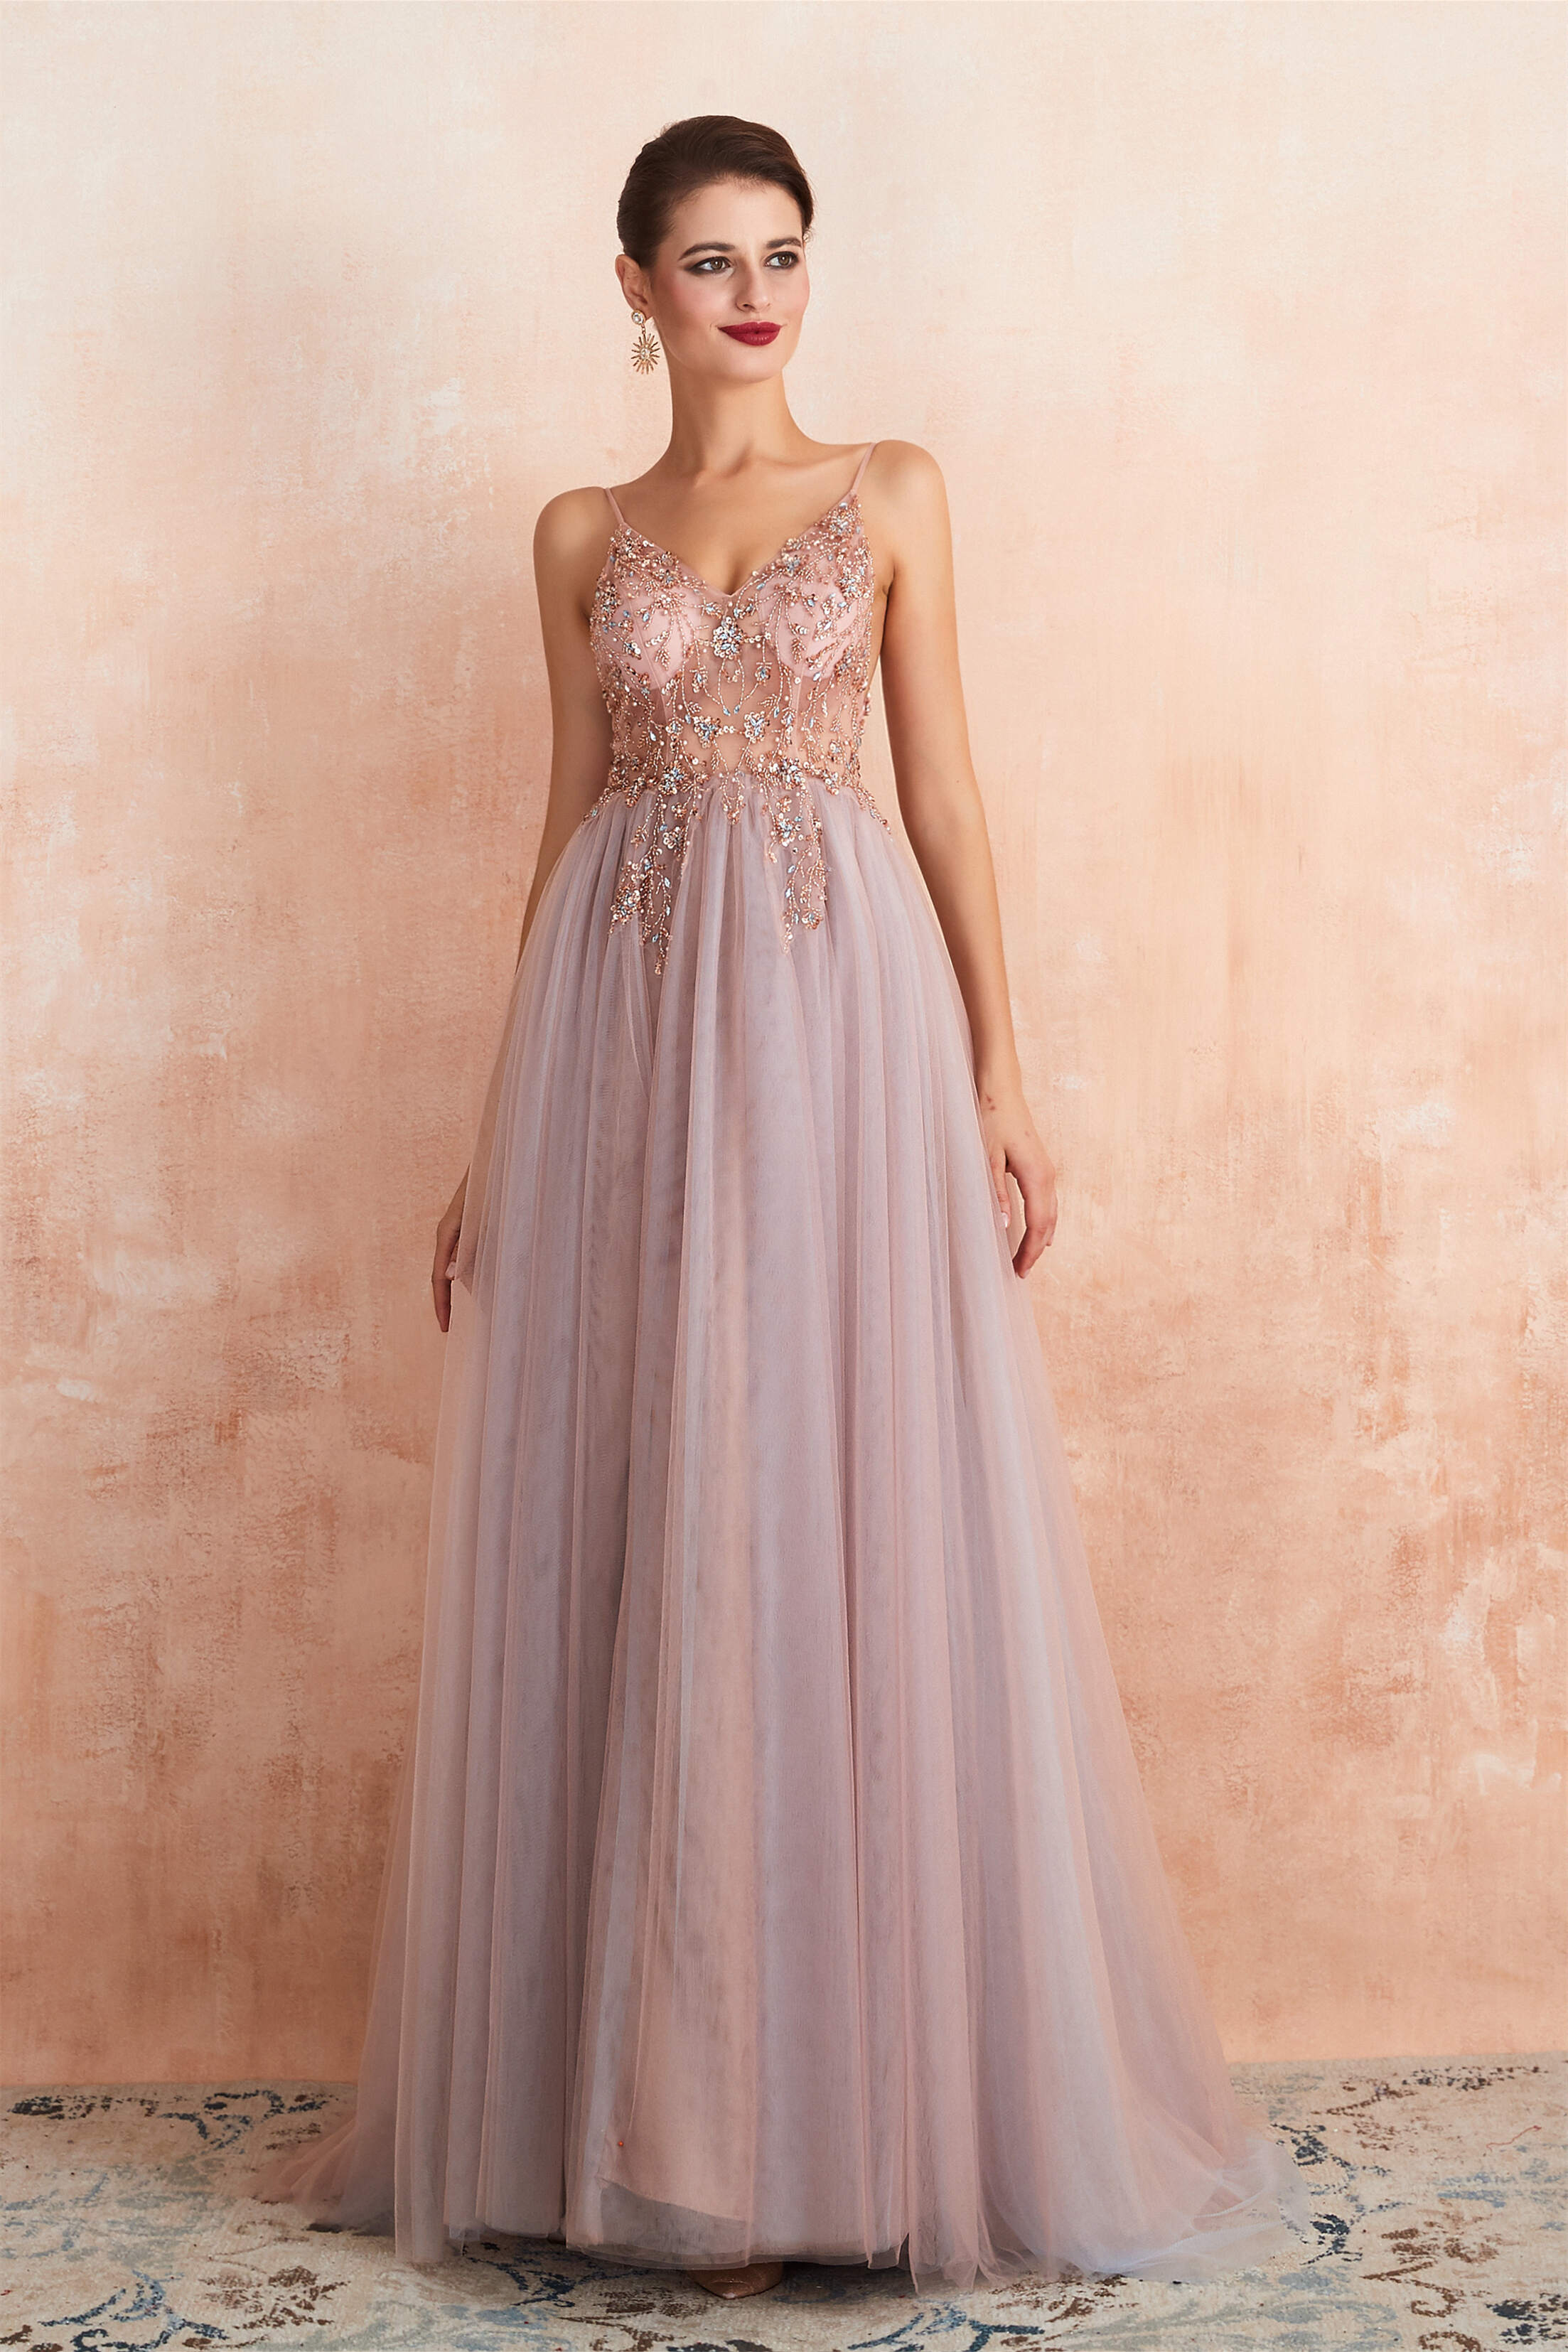 Prom Dresses Long Formal Evening Gown, Spaghetti Straps V-neck Sheer Top Tulle Long Prom Dresses with Side Slit